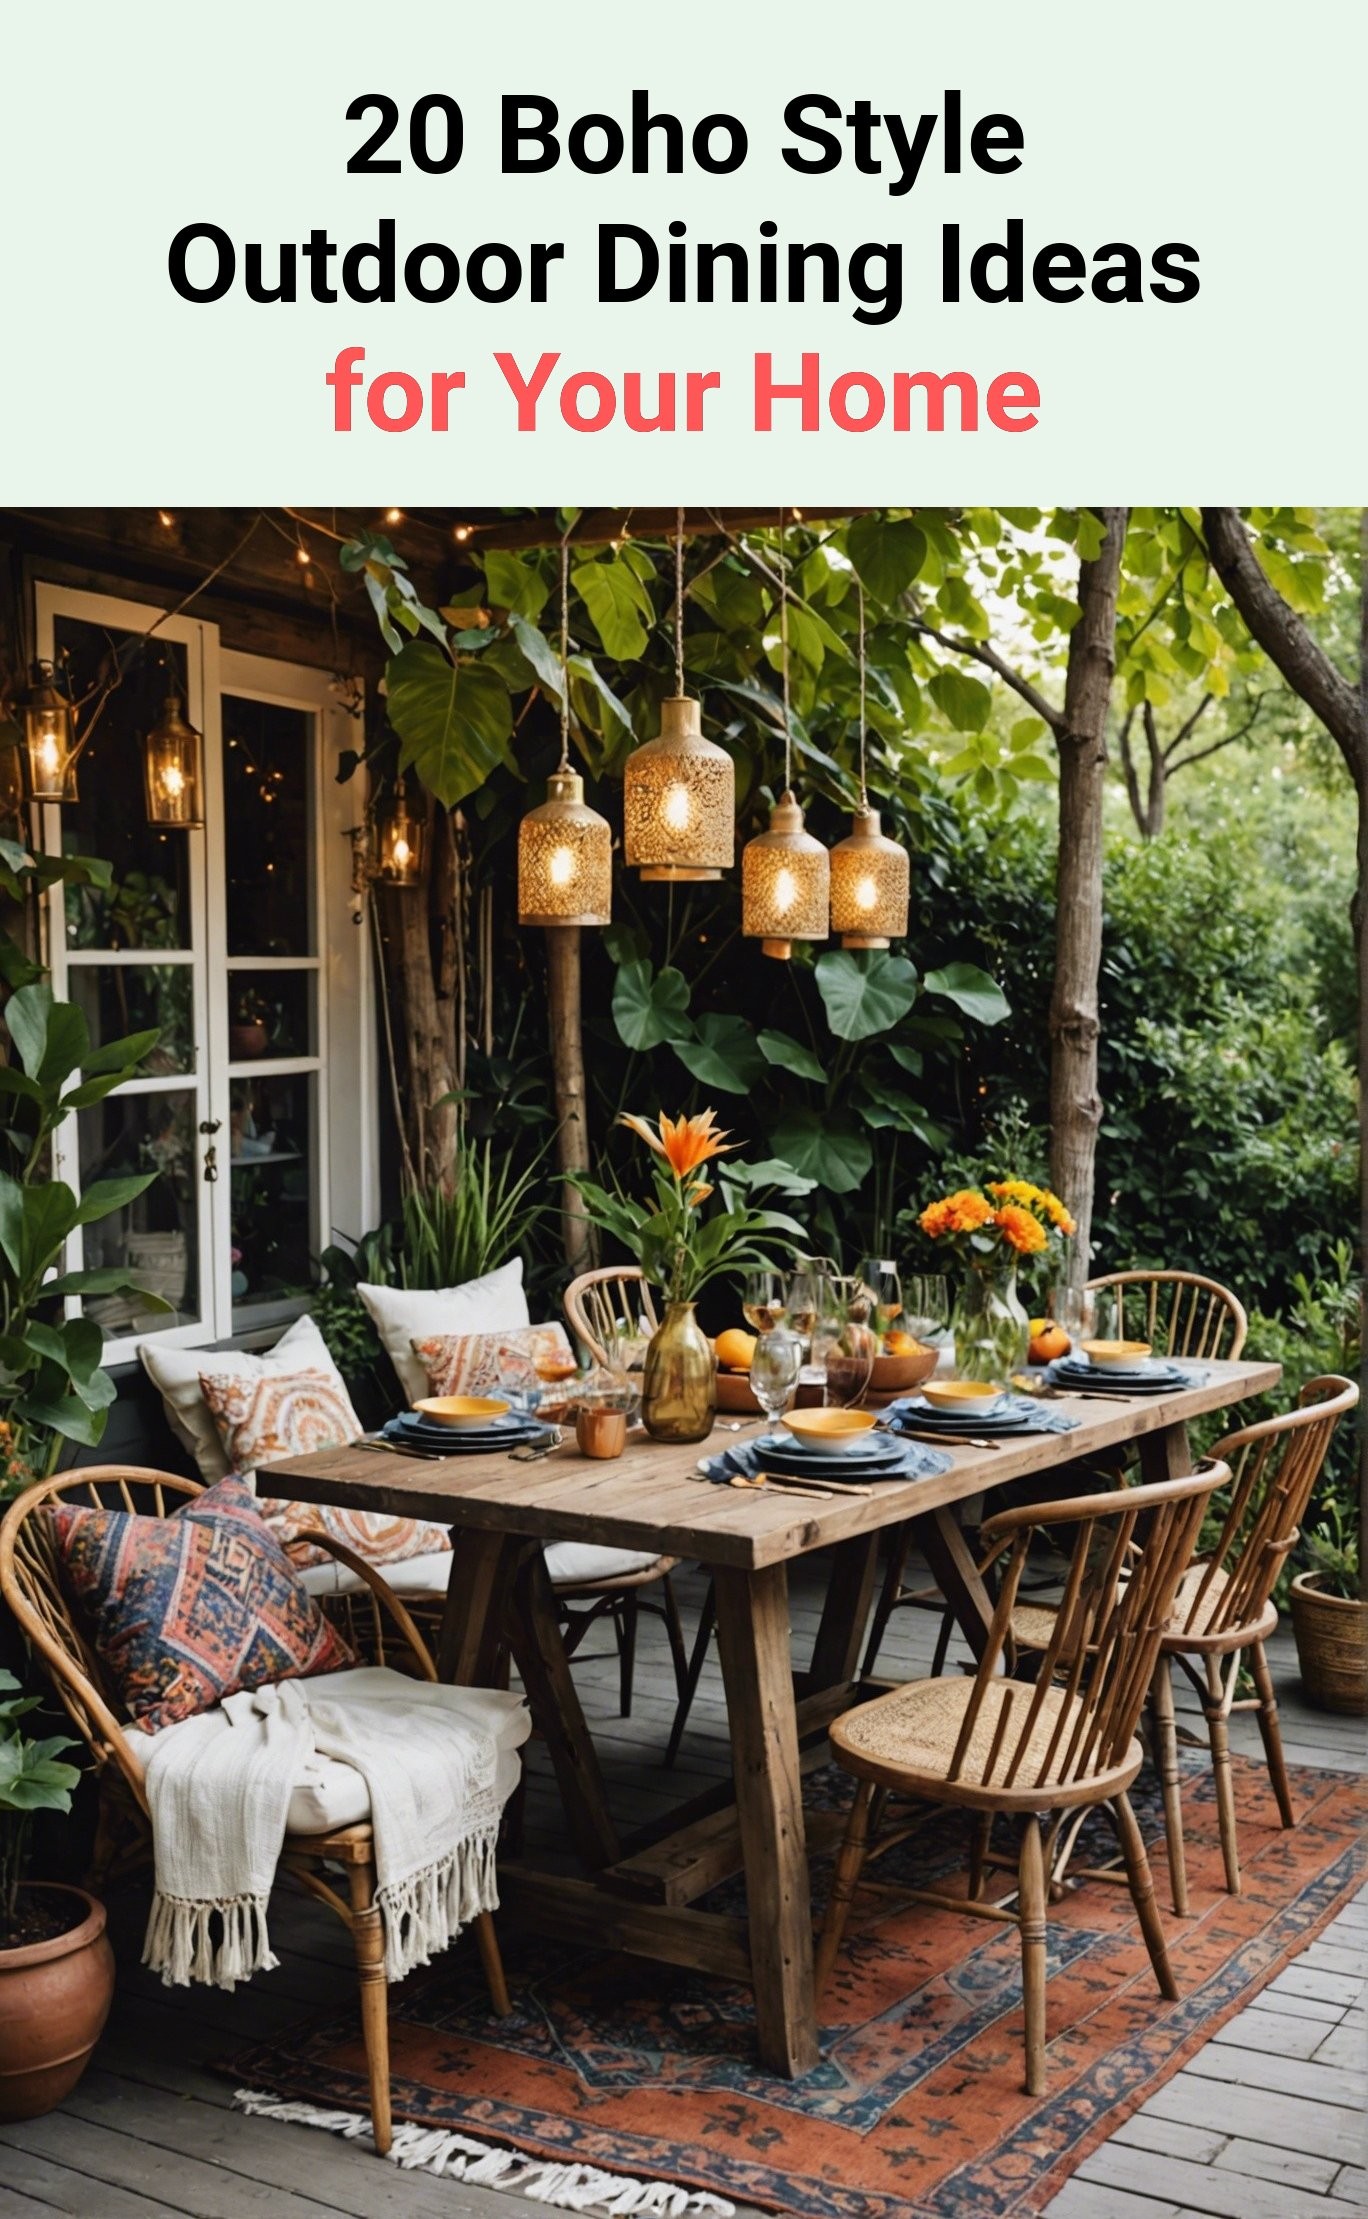 20 Boho Style Outdoor Dining Ideas for Your Home